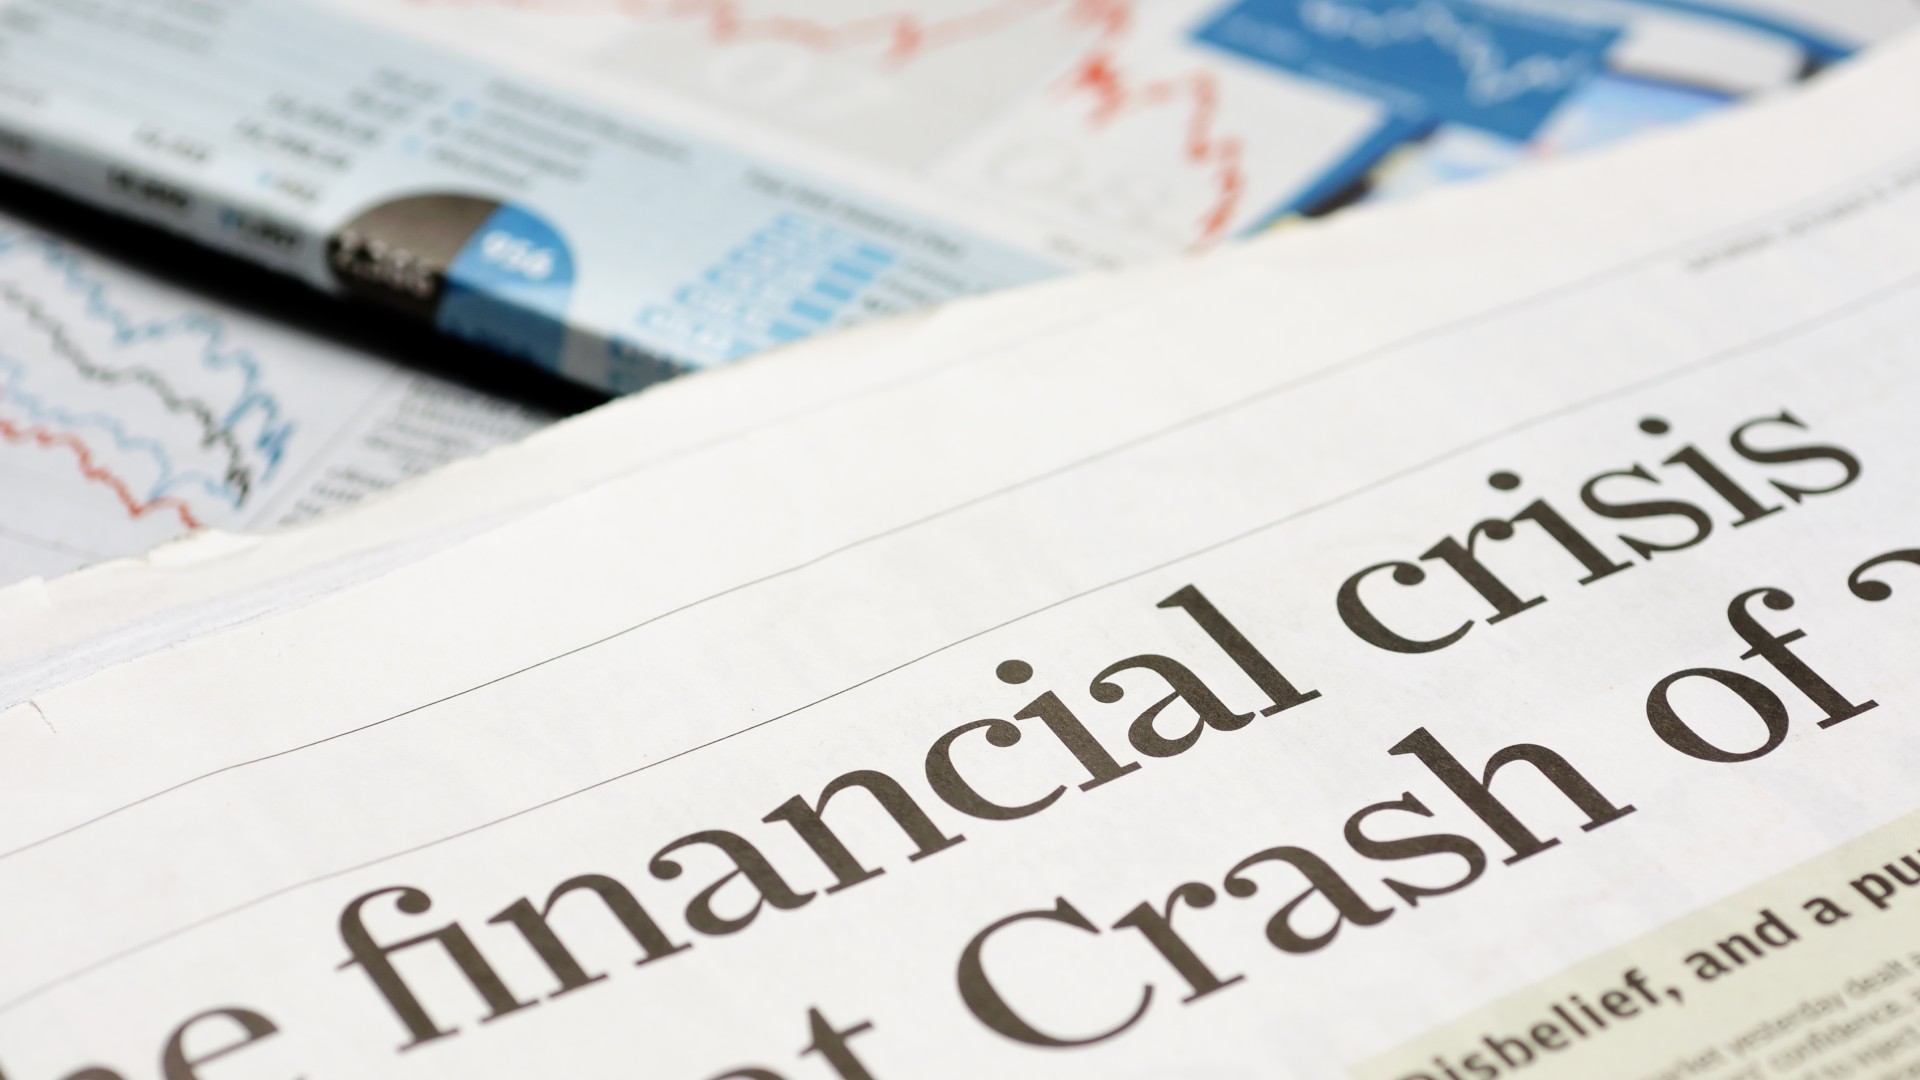 Newspapers detailing the 2008 financial crash